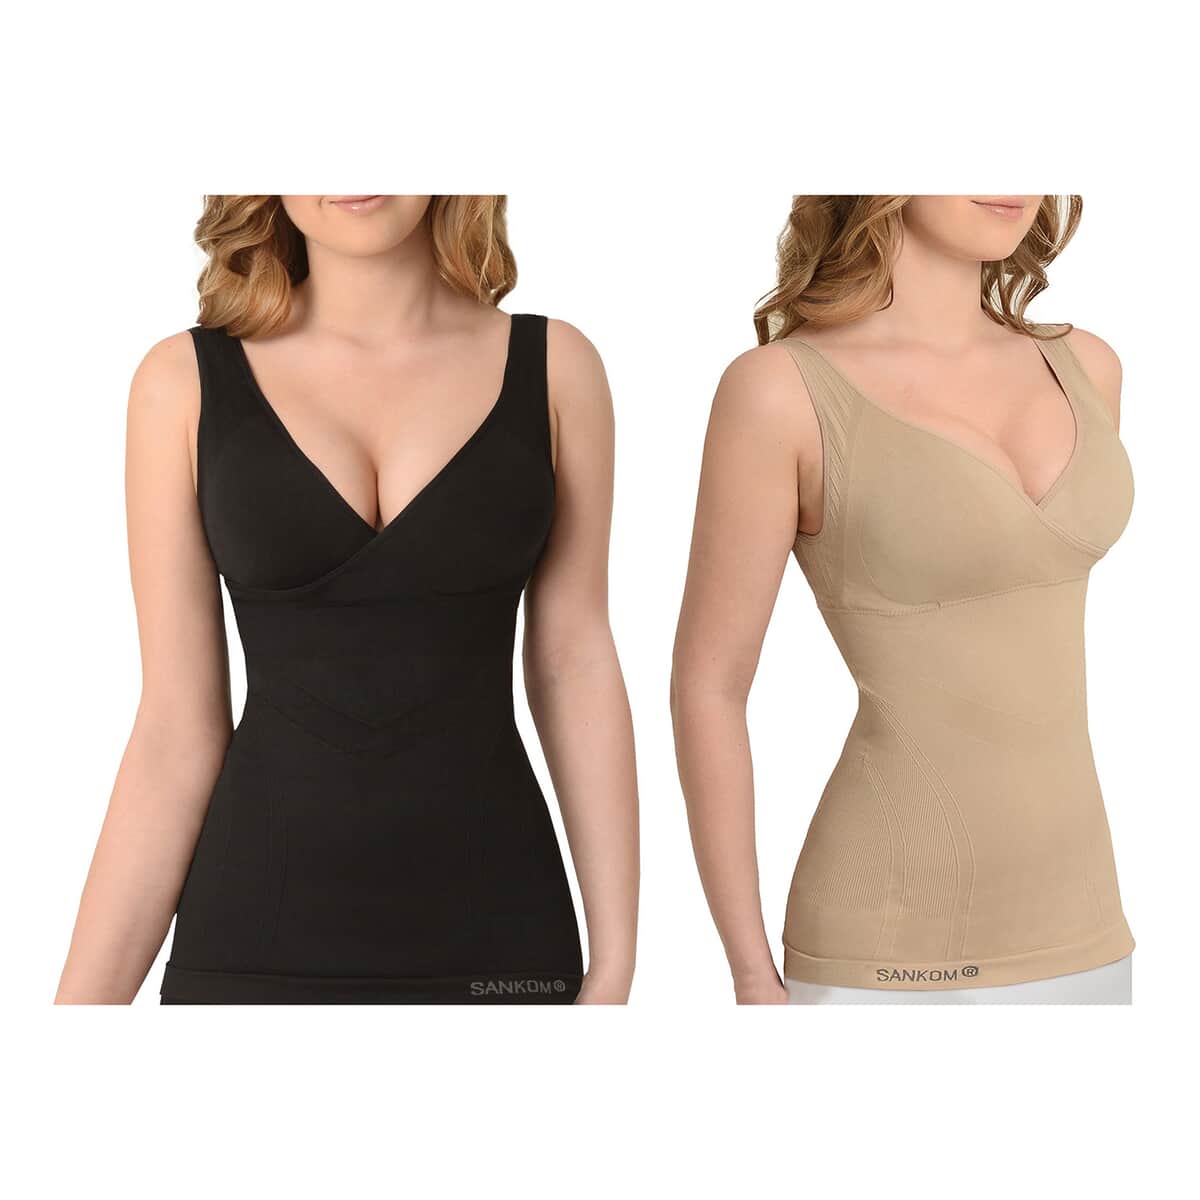 SANKOM Patent Set of 2 Classic Shaping Camisole with Bra (M/L, Black & Beige) image number 0